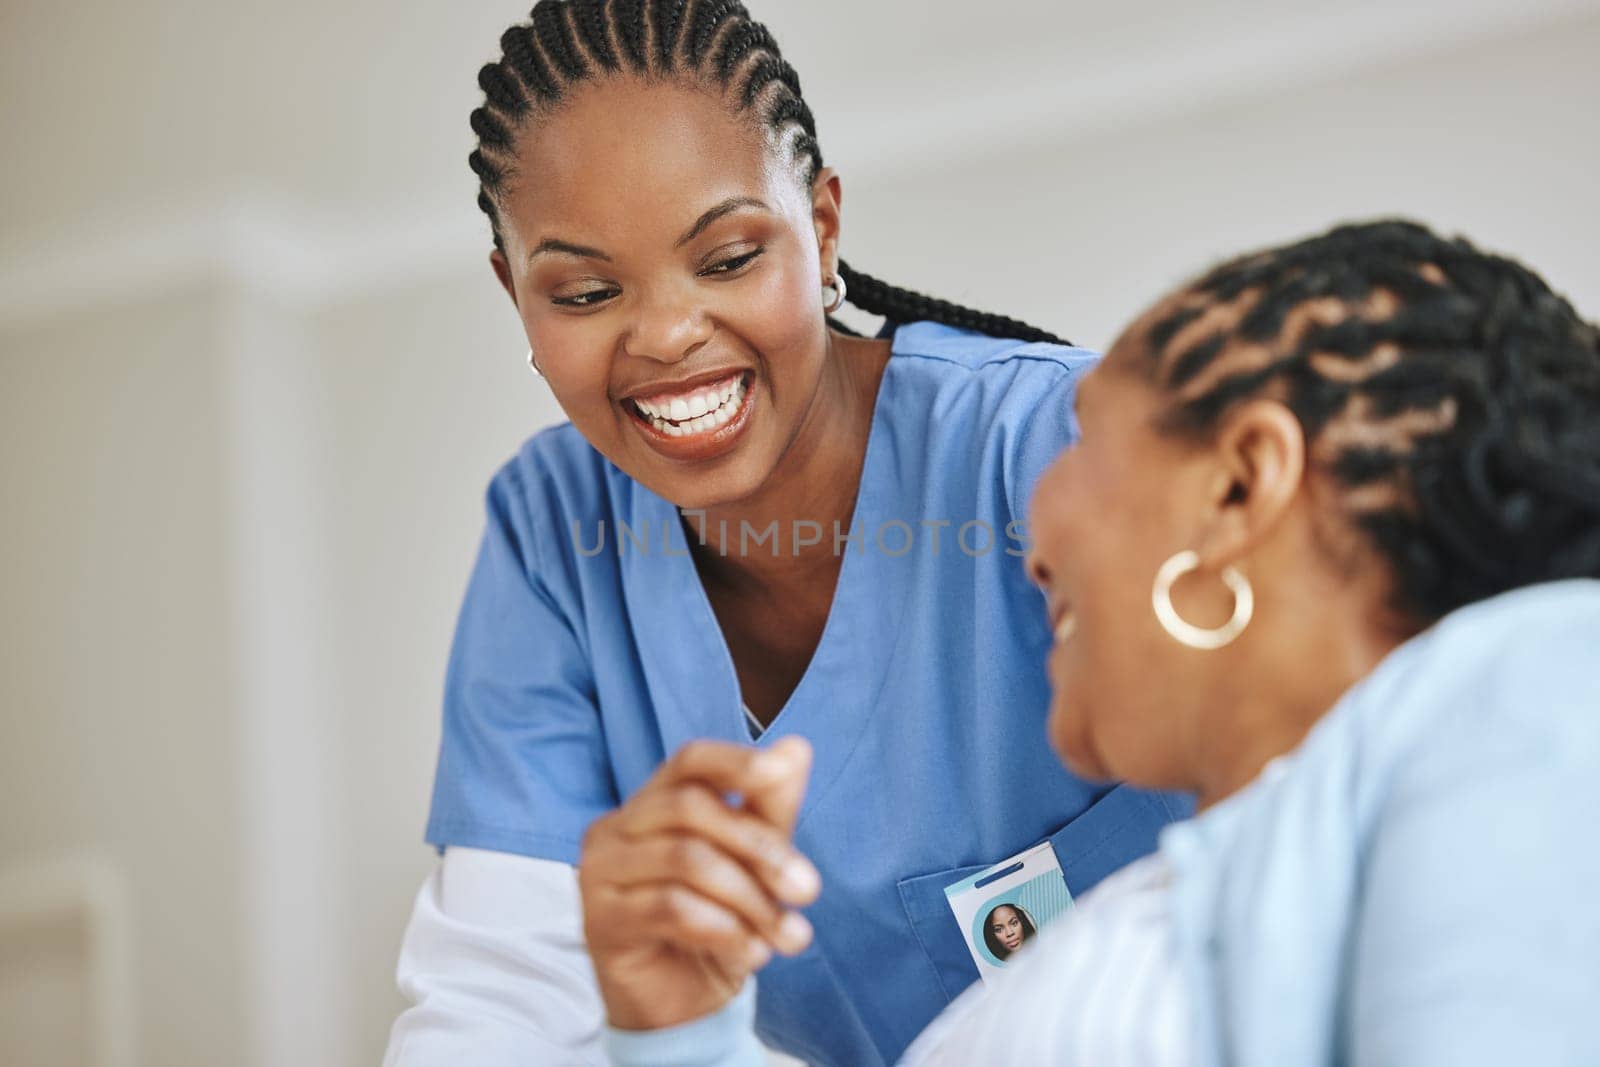 Senior patient, laughing and woman nurse together for support, healthcare and happiness. Black person and happy caregiver in retirement home for trust, elderly care and help for health and wellness.